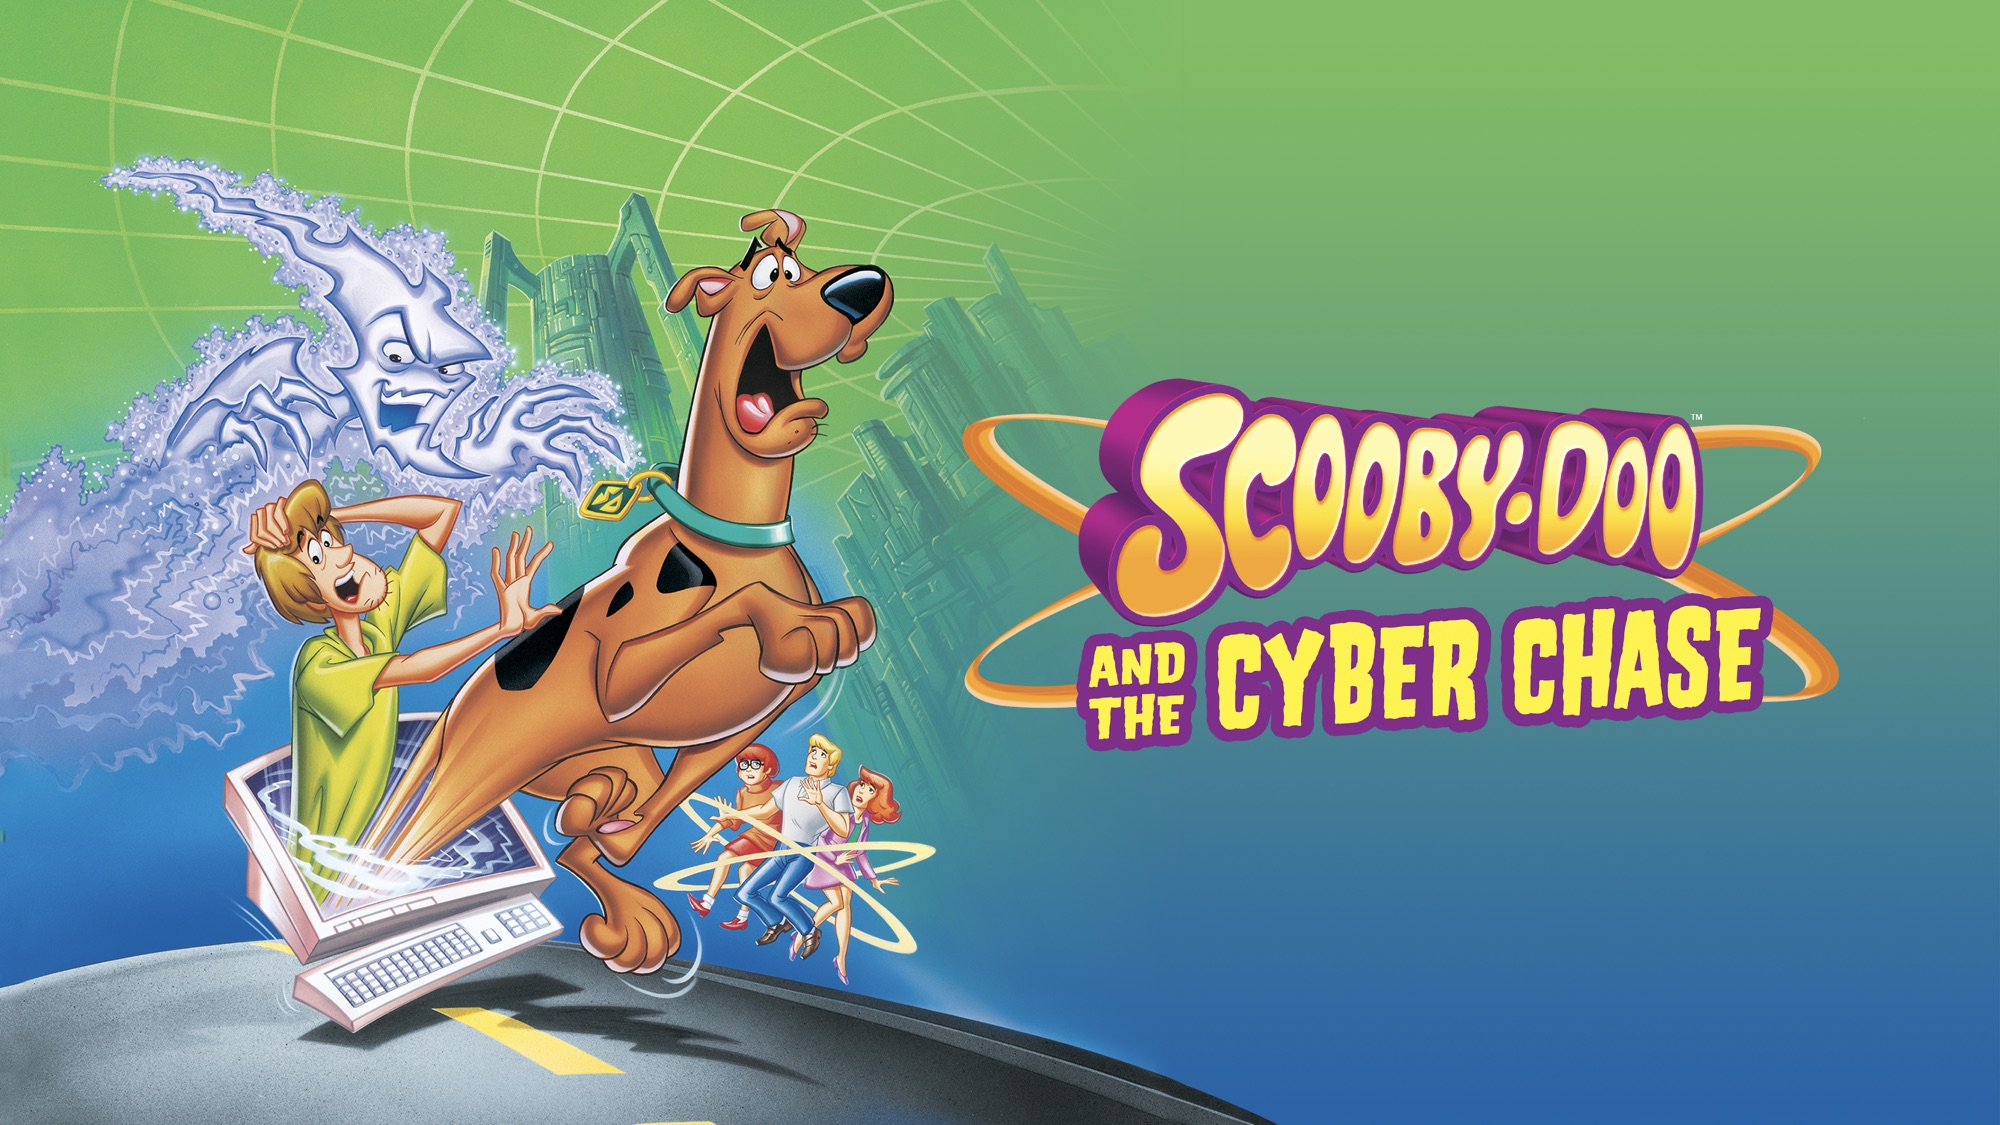 Scooby Doo And The Cyber Chase HD Wallpaper